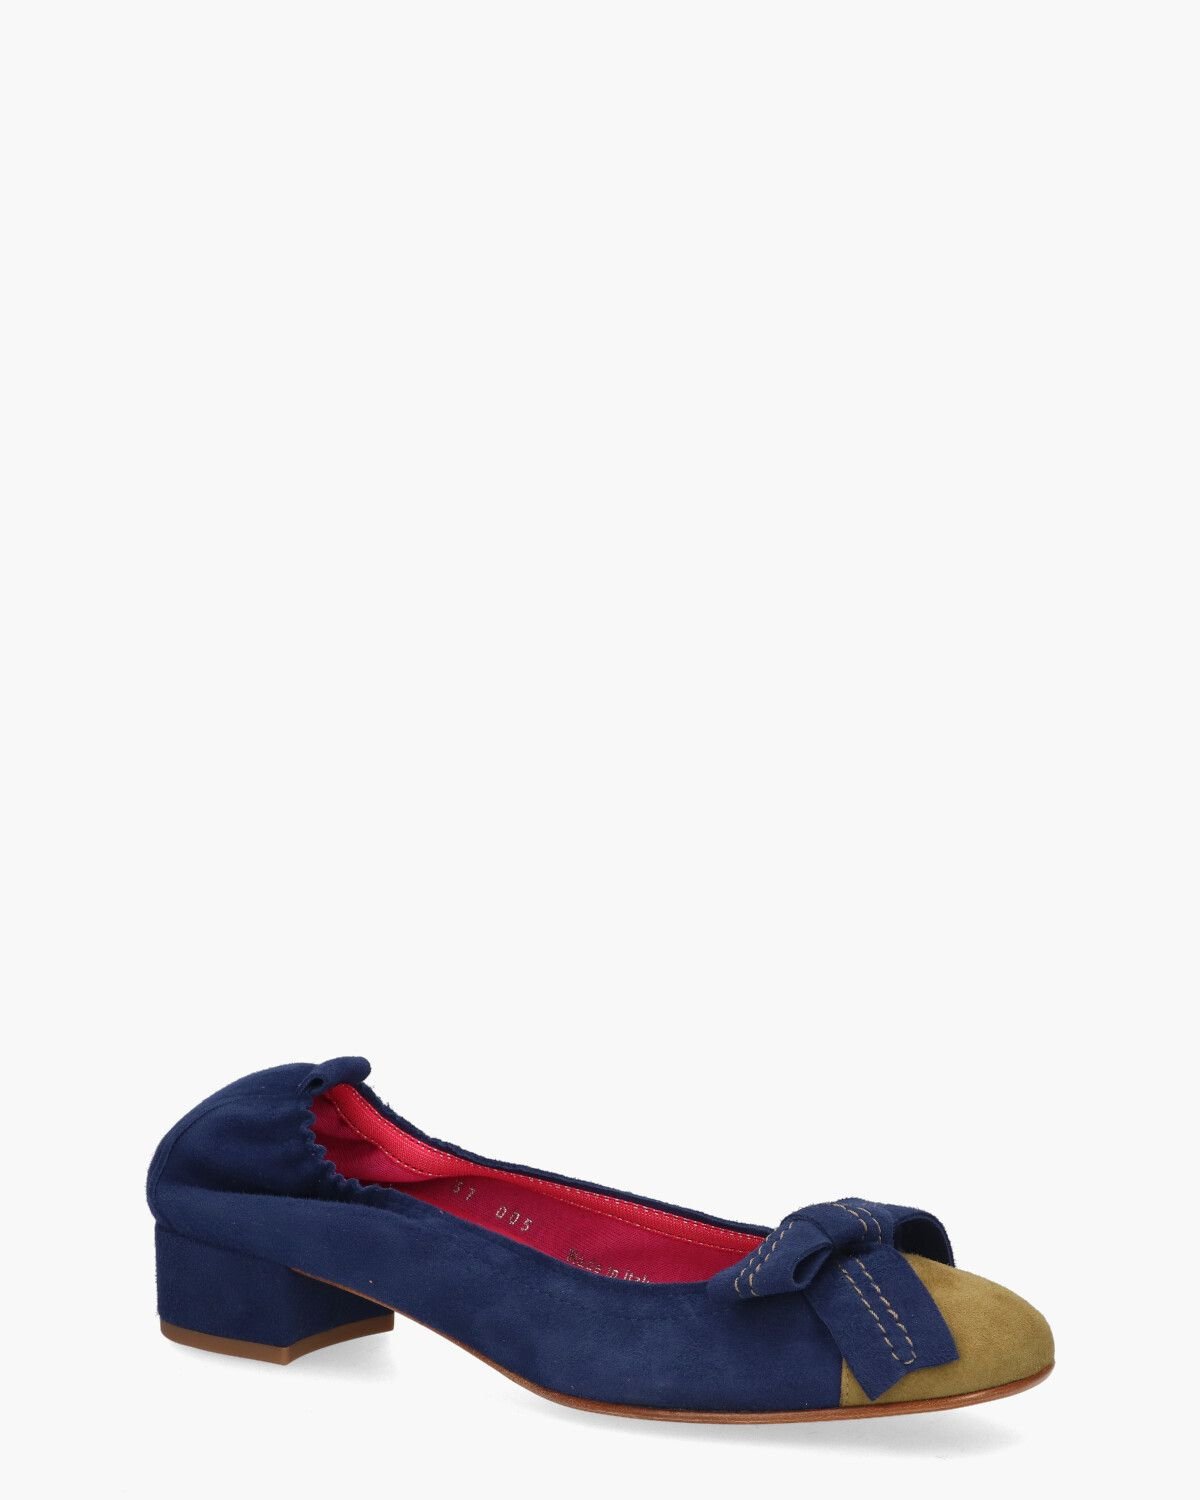 3337 Donkerblauw Damesloafers